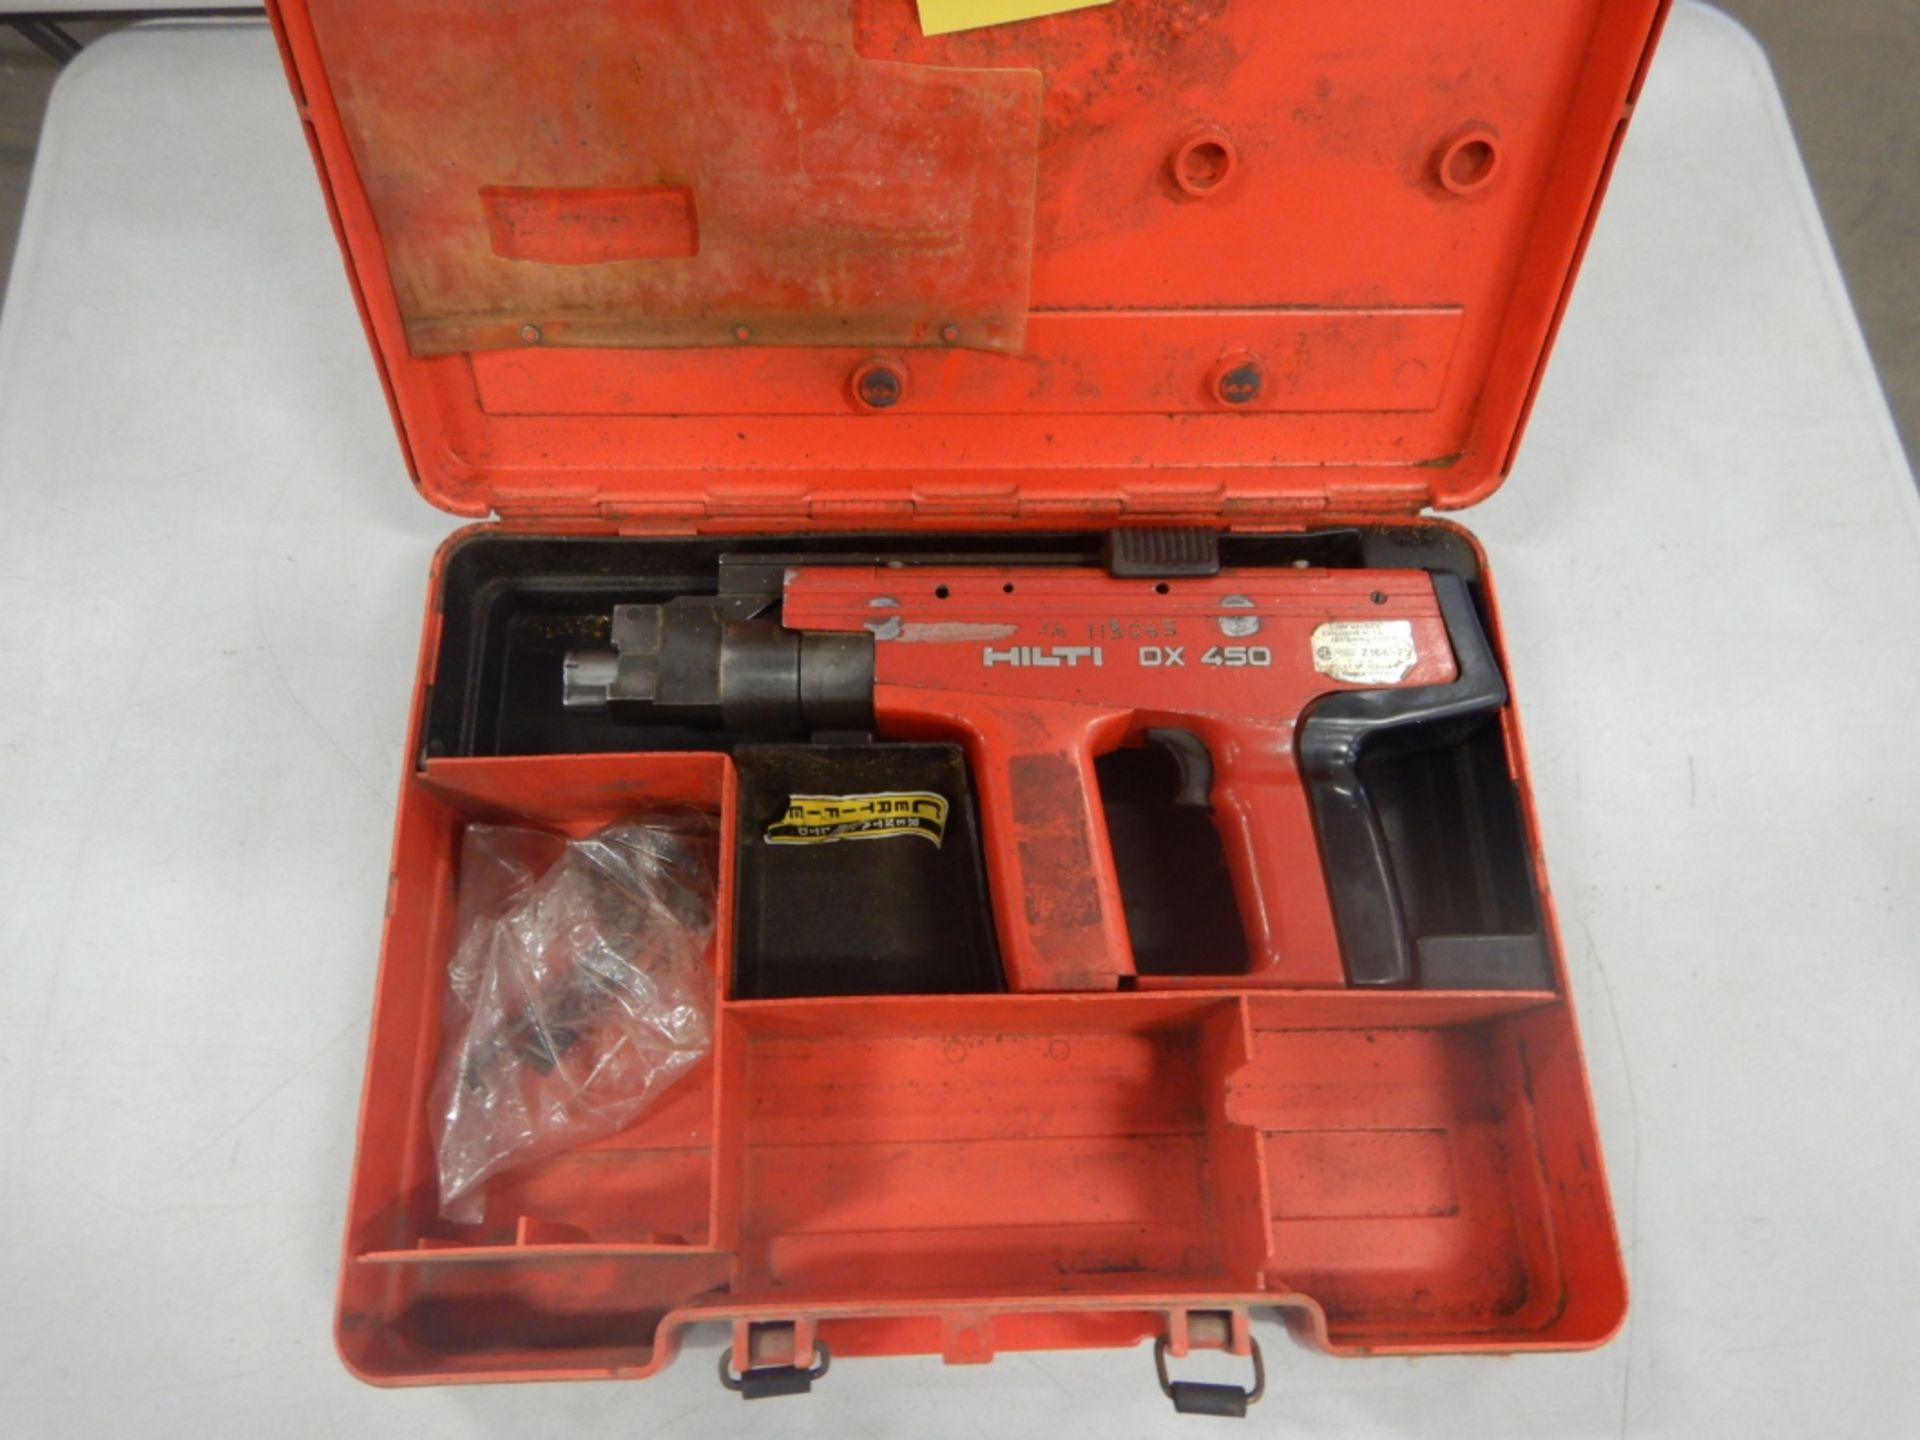 A47 - HILTI DX450 ACTUATED FASTENING TOOL, S/N 113065